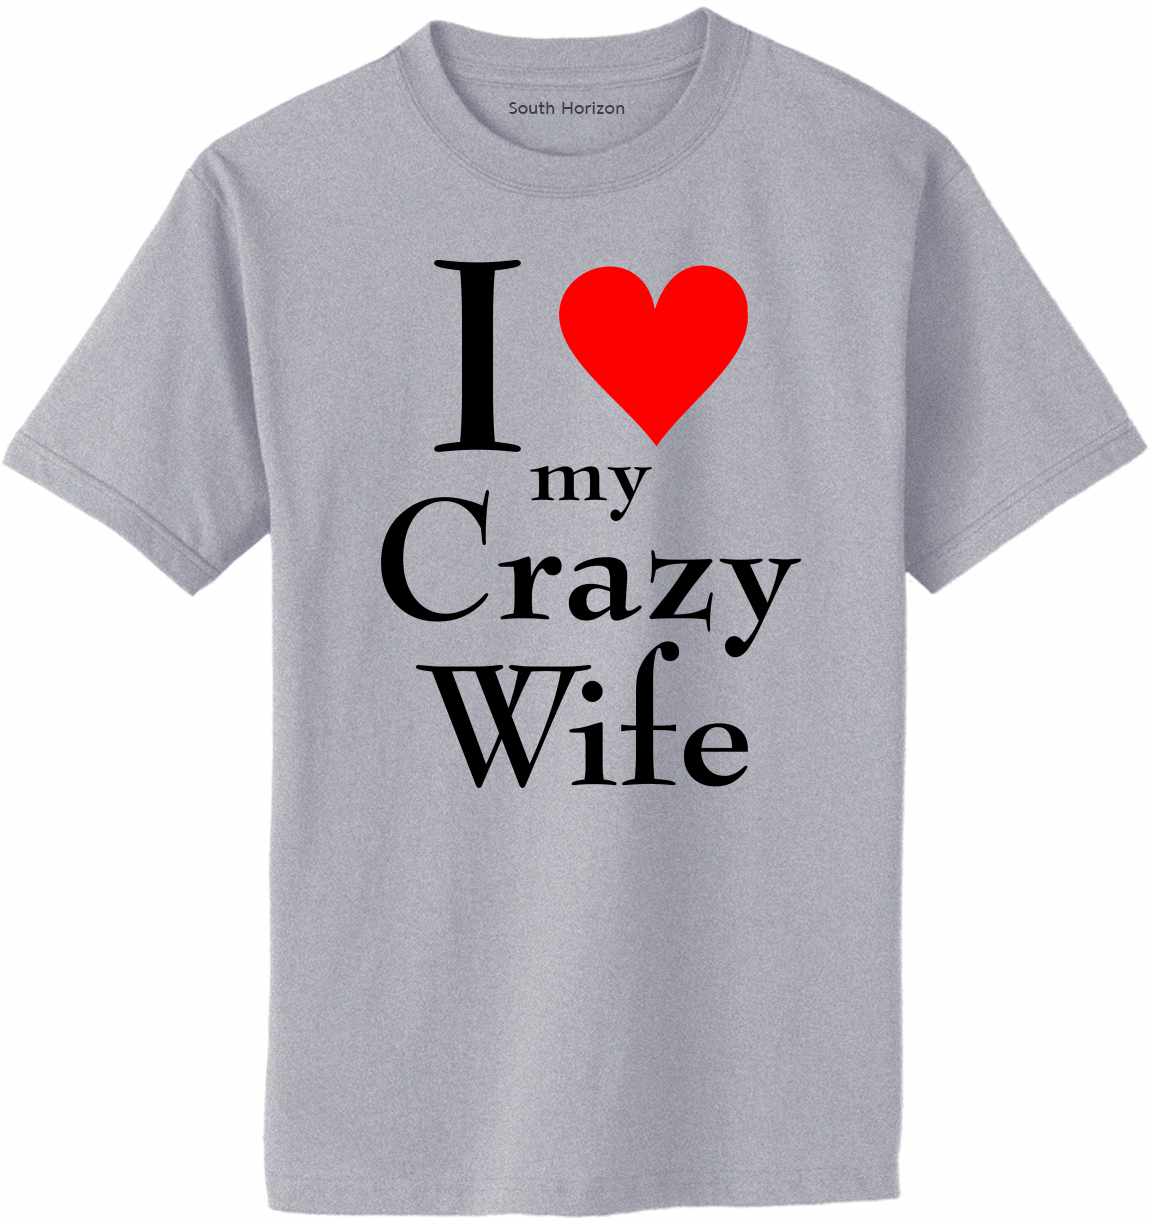 I LOVE MY CRAZY WIFE Adult T-Shirt (#1024-1)